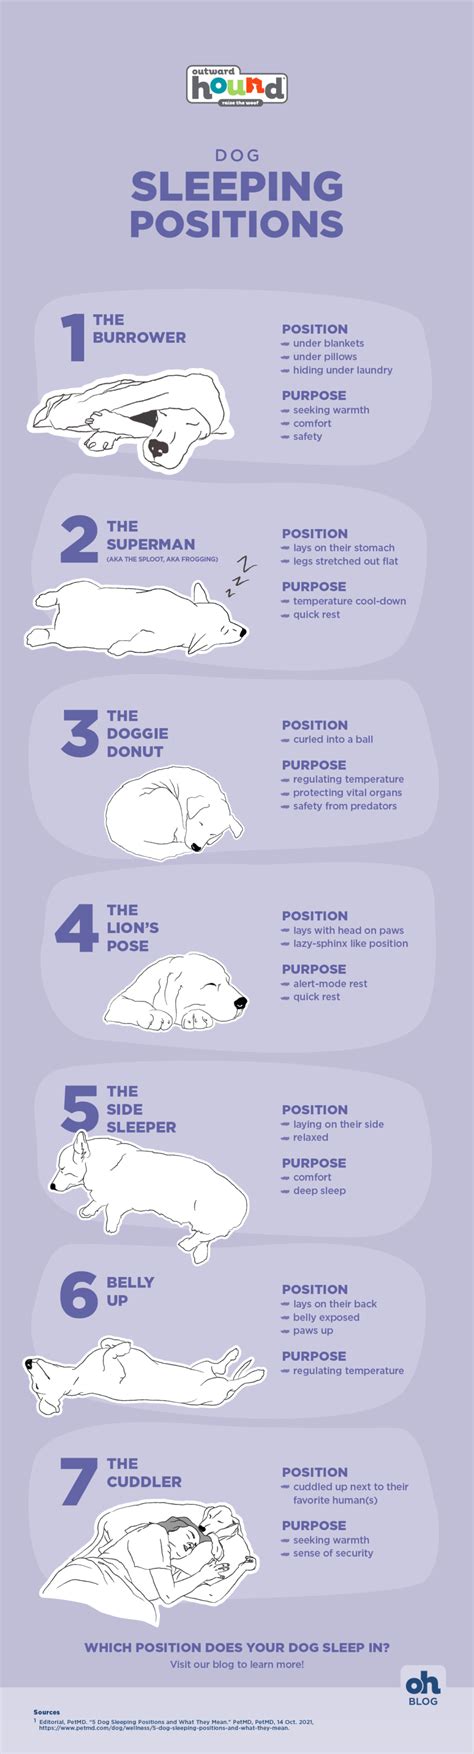 What Do Sleeping Positions Of Dogs Mean